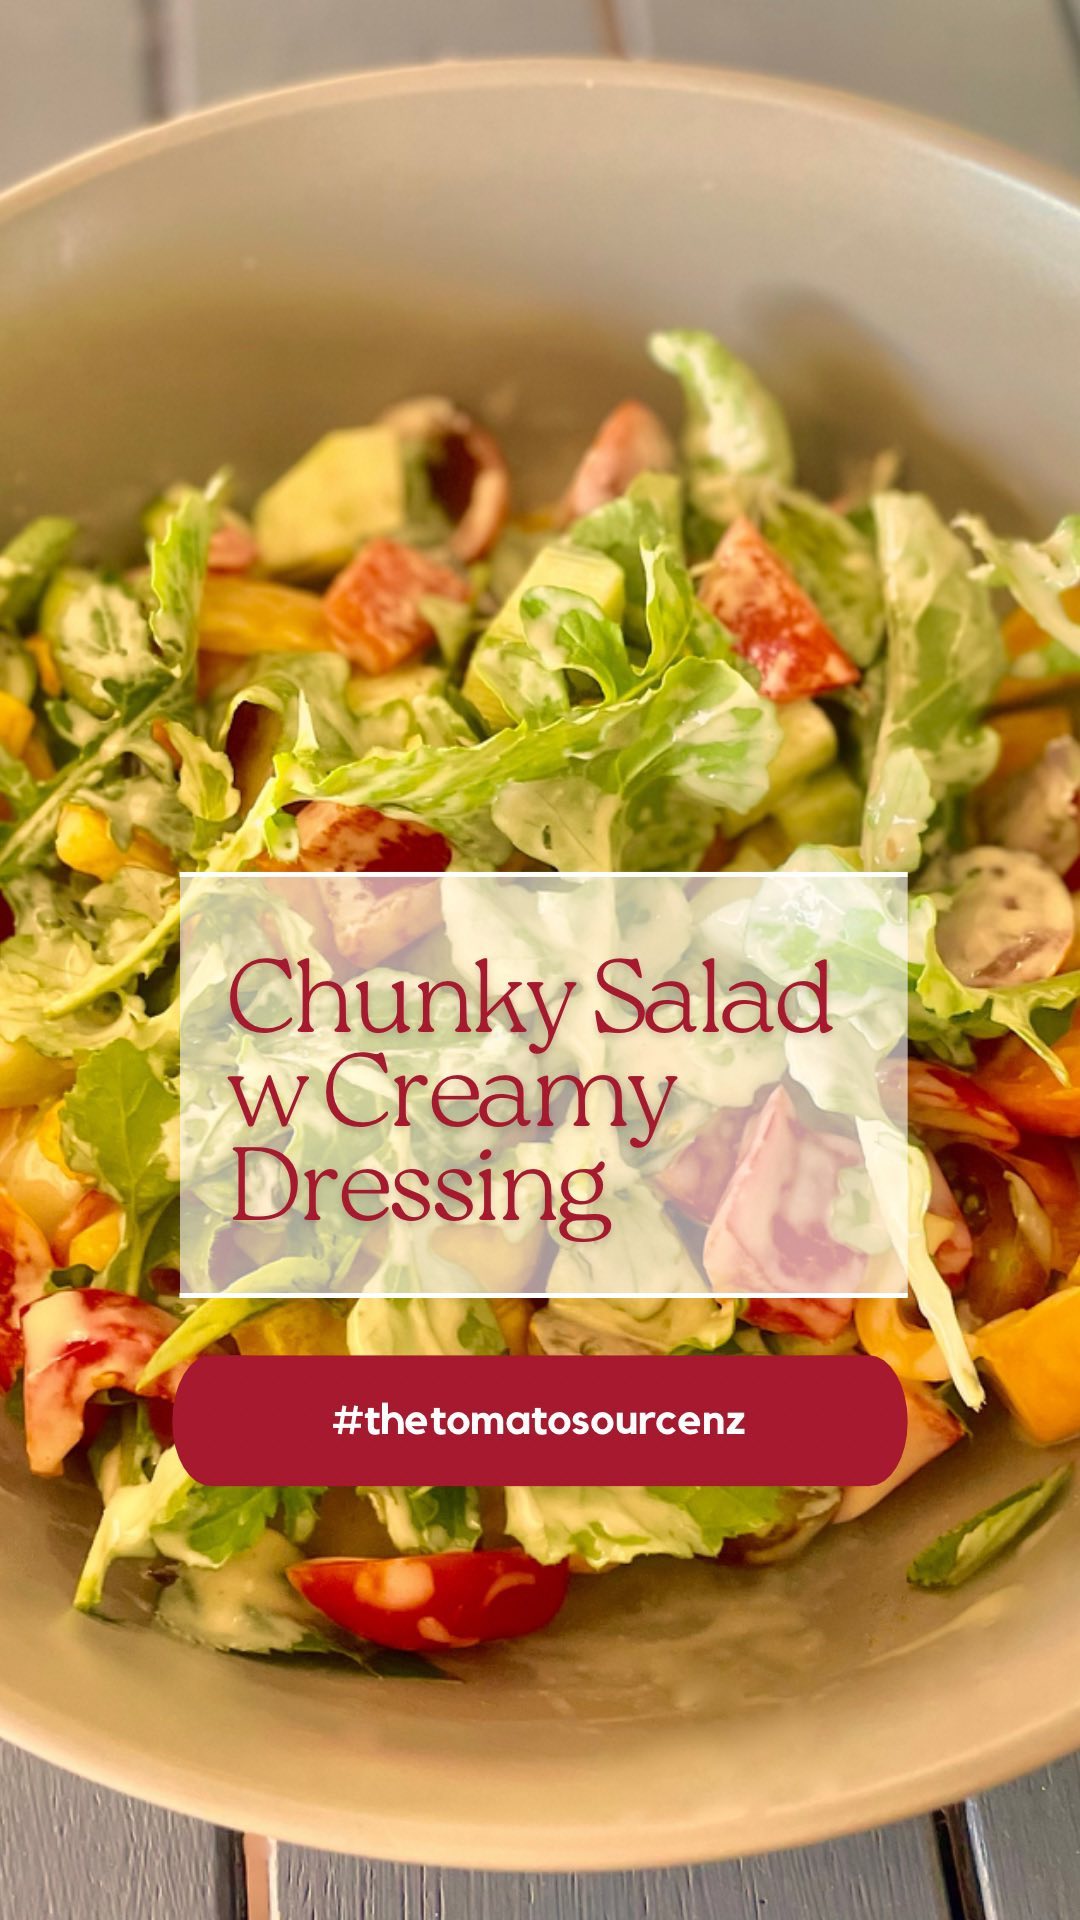 Chop chunks of capsicum, cucumber and halve cherry tomatoes, mix with a handful of greens and drizzle with a creamy dressing…..Caesar or Tahini or Yoghurt or whatever your favourite velvety dressing choice is
.
.
.
.
.
#thetomatosourcenz #tomatoesnz #nztomatoes #saladideas #saladsofinstagram